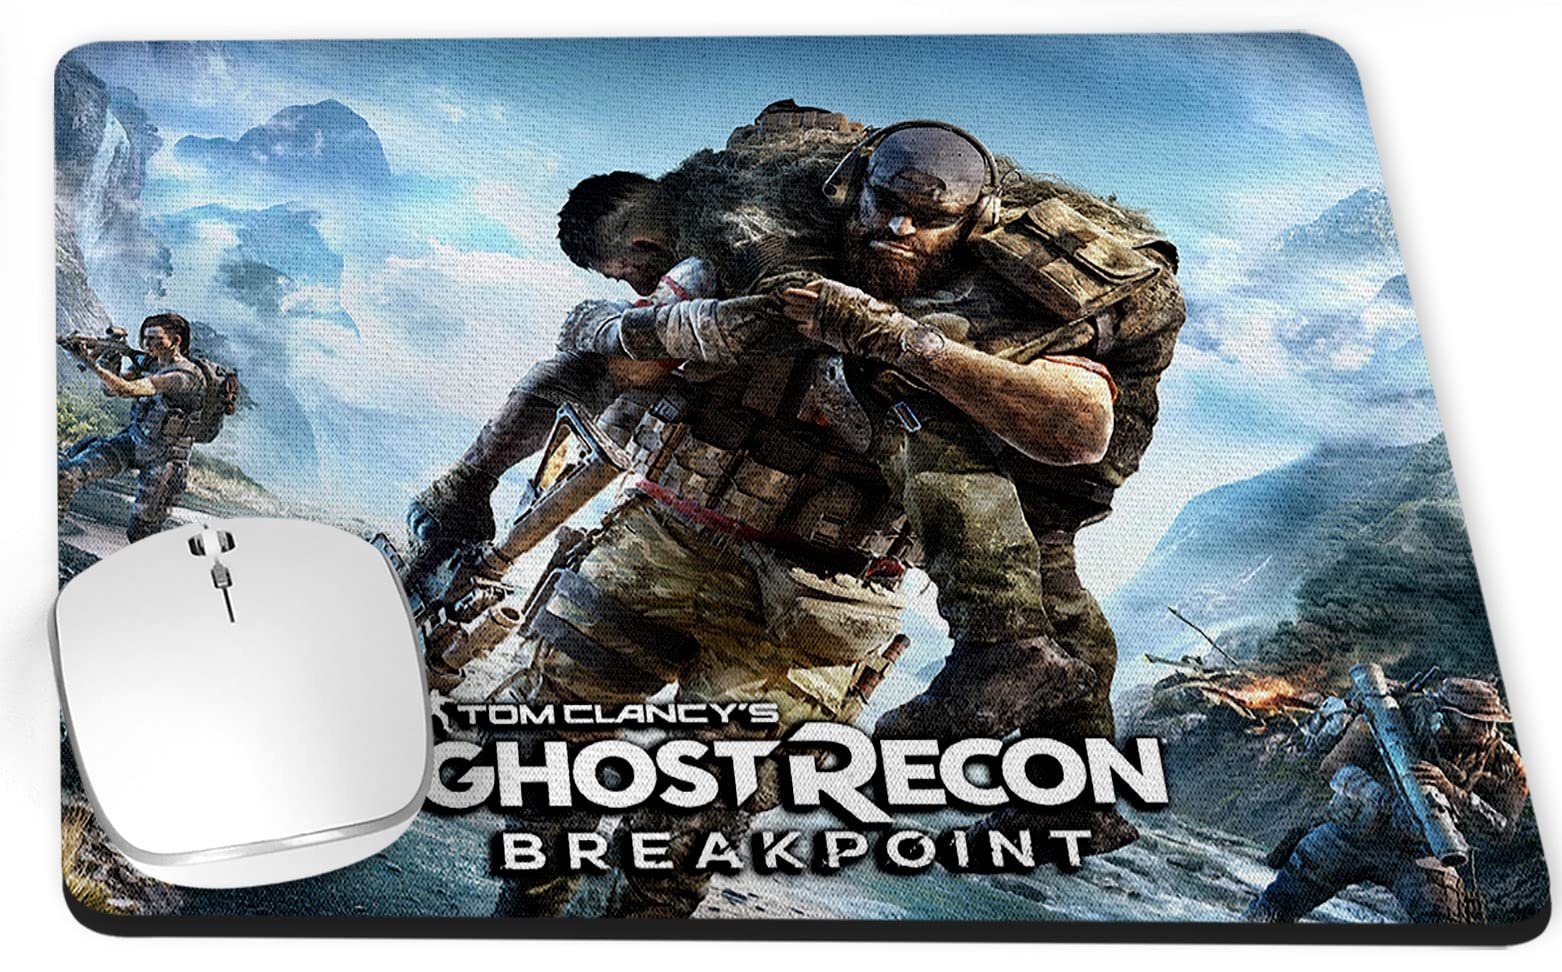 Tom Mauspad Clancy's Ghost PC Recon Breakpoint A